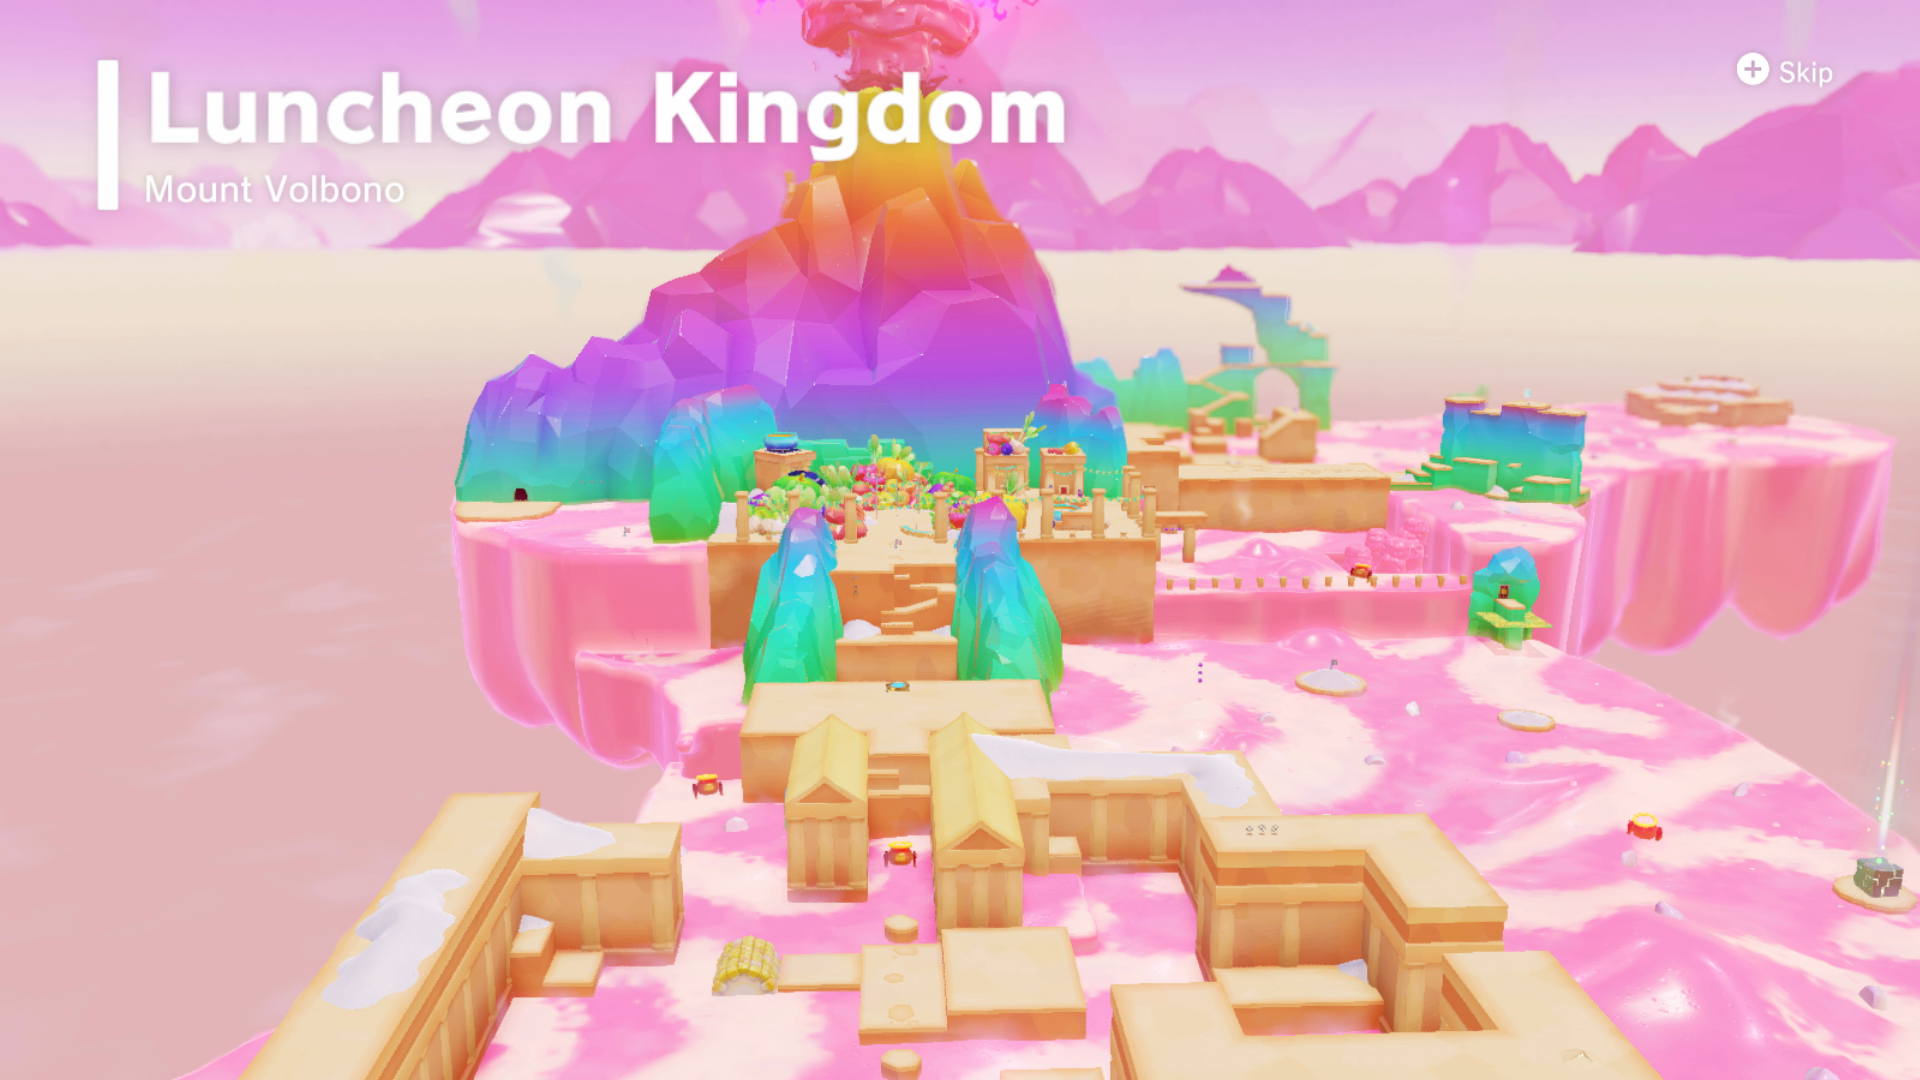 Every kingdom you can visit in Super Mario Odyssey